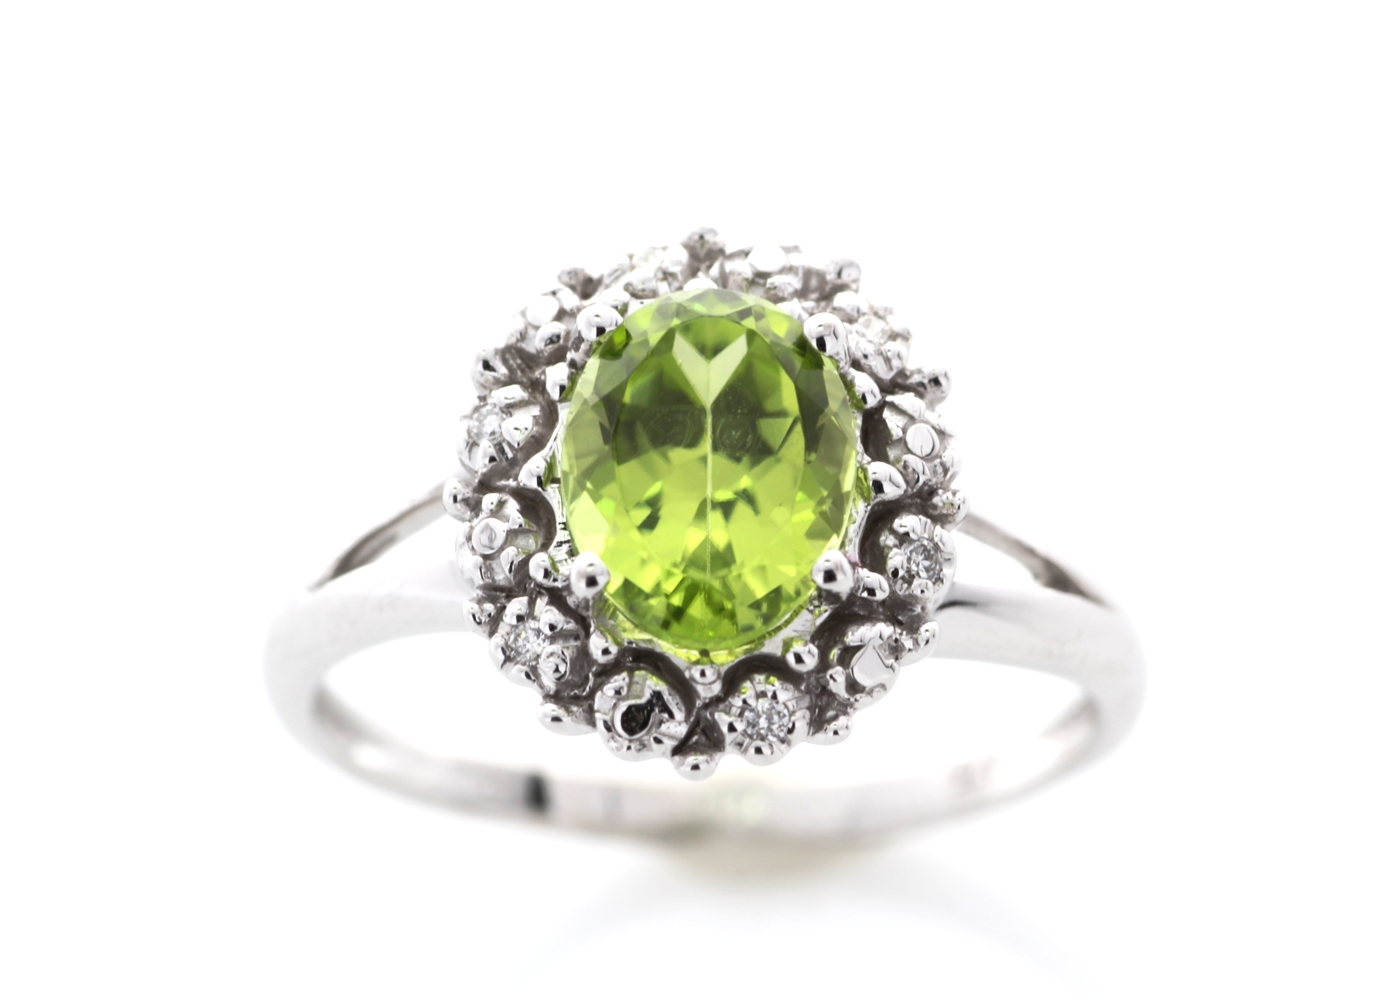 9ct White Gold Cluster Diamond And Peridot Ring 1.40 Carats - Image 6 of 7